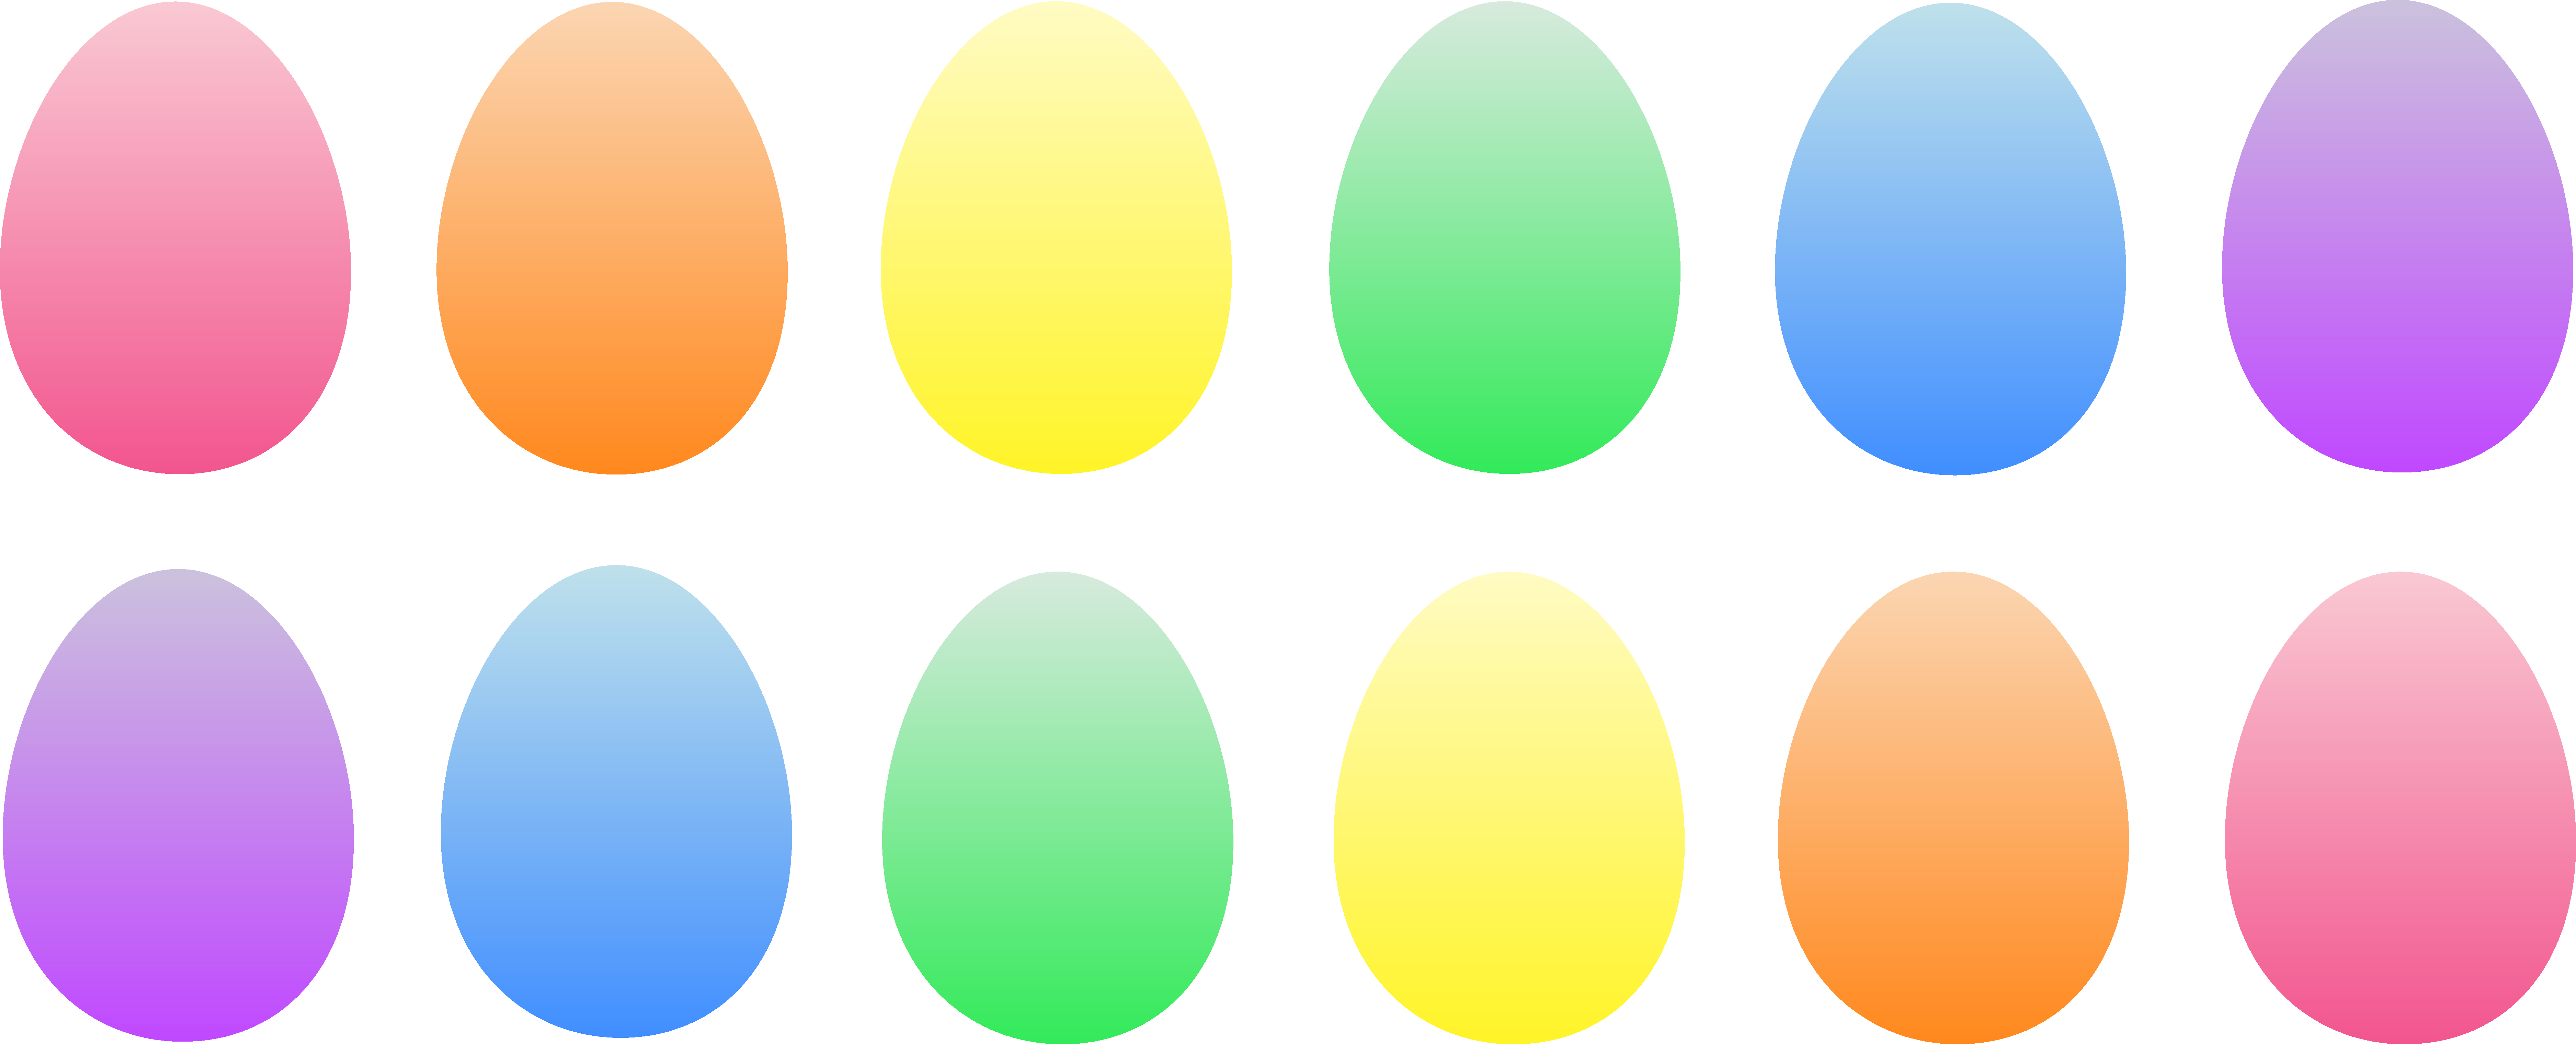 Easter Egg Clipart   Clipart Panda   Free Clipart Images